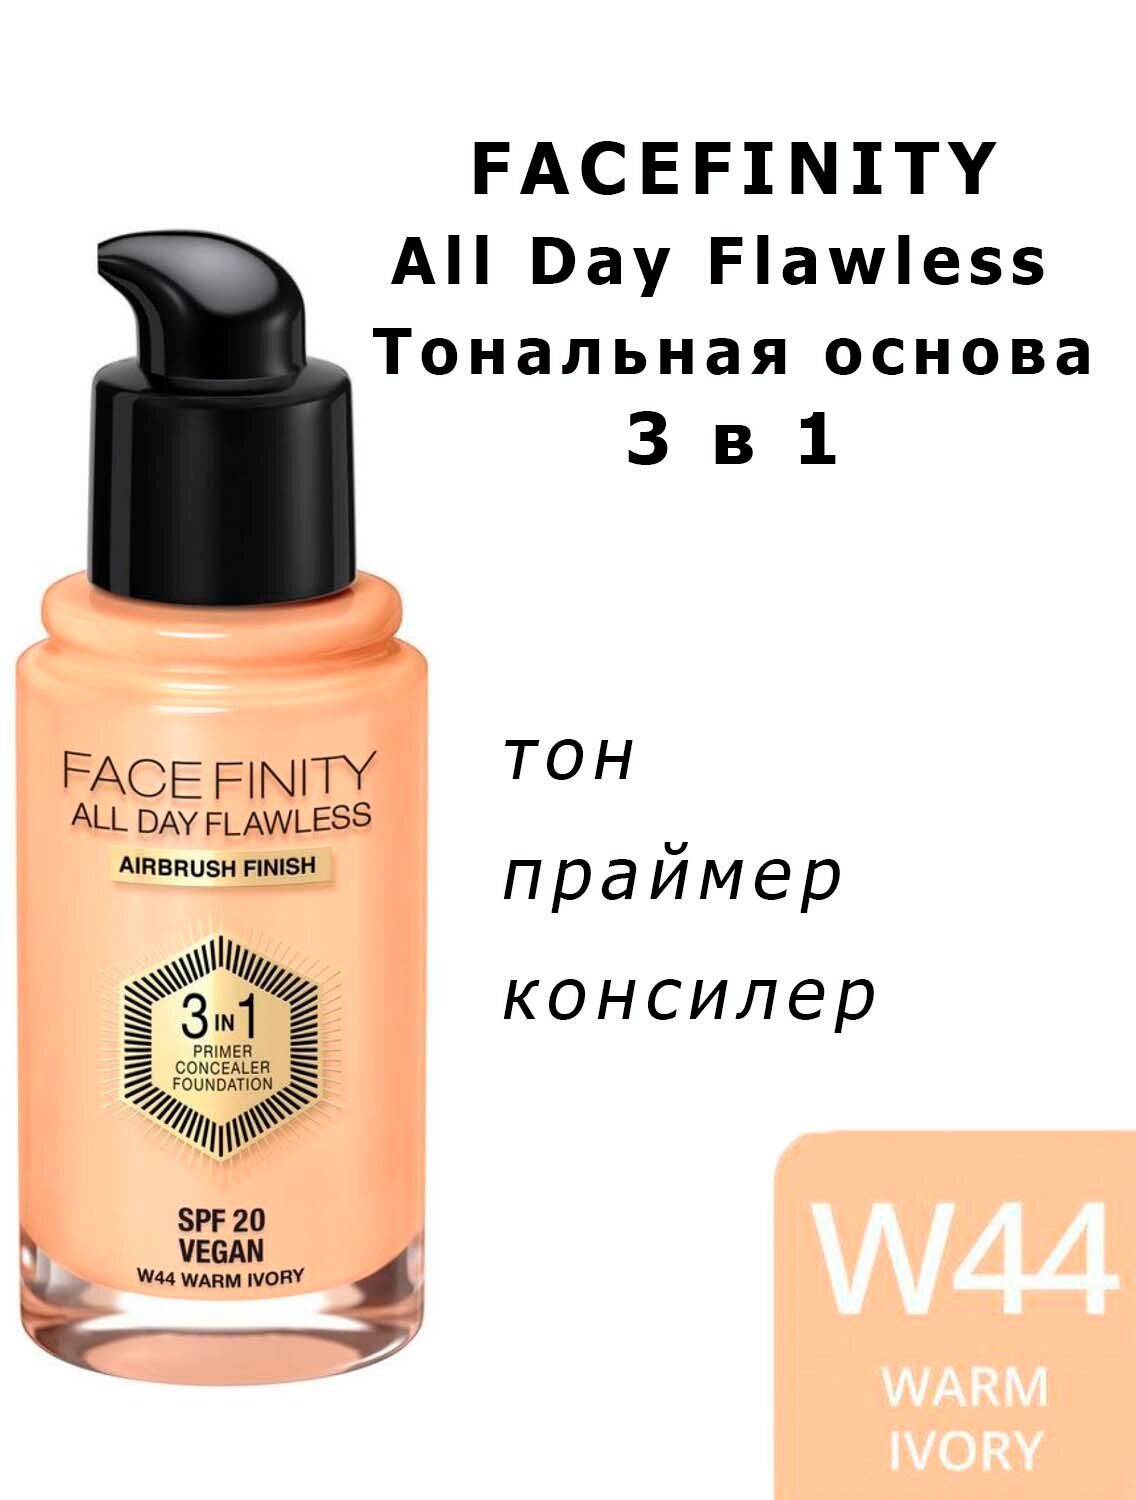 Max Factor   Facefinity All Day Flawless 3-in-1, SPF 20, 30 /45 , : 44 Warm Ivory